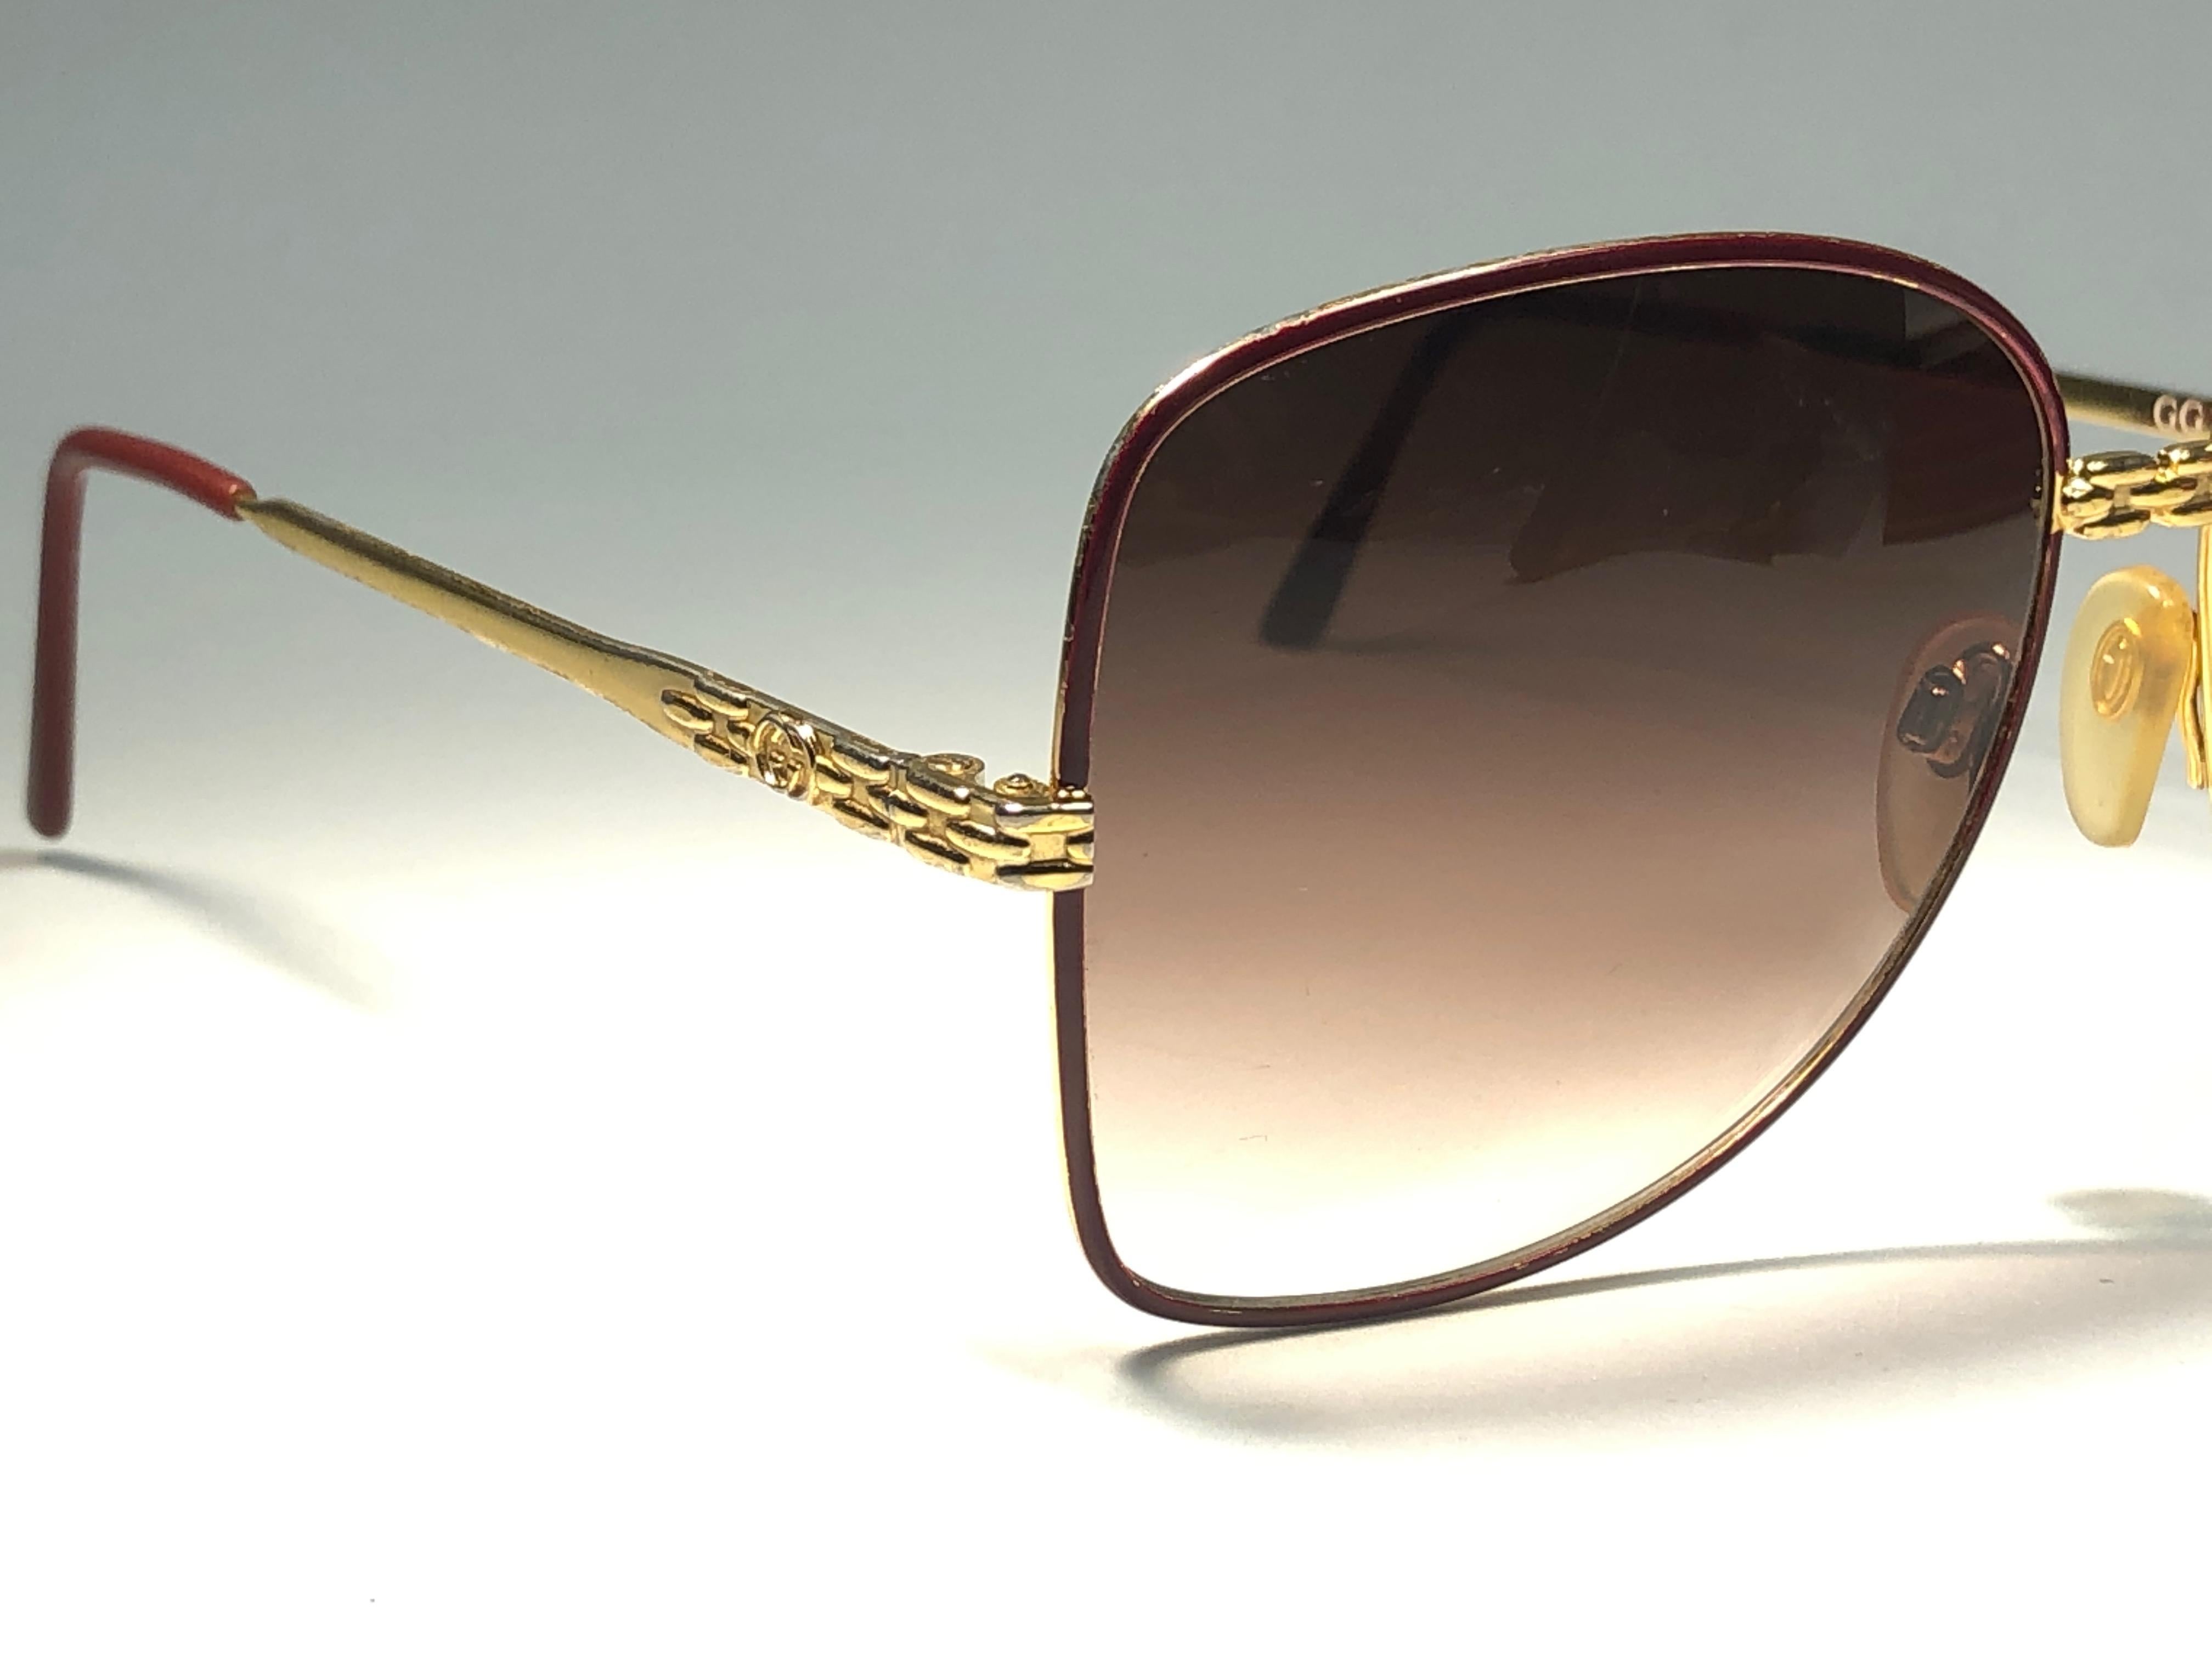 Women's Mint Vintage Gucci 2219 Sunglasses Burgundy & Gold 1990's Made in Italy